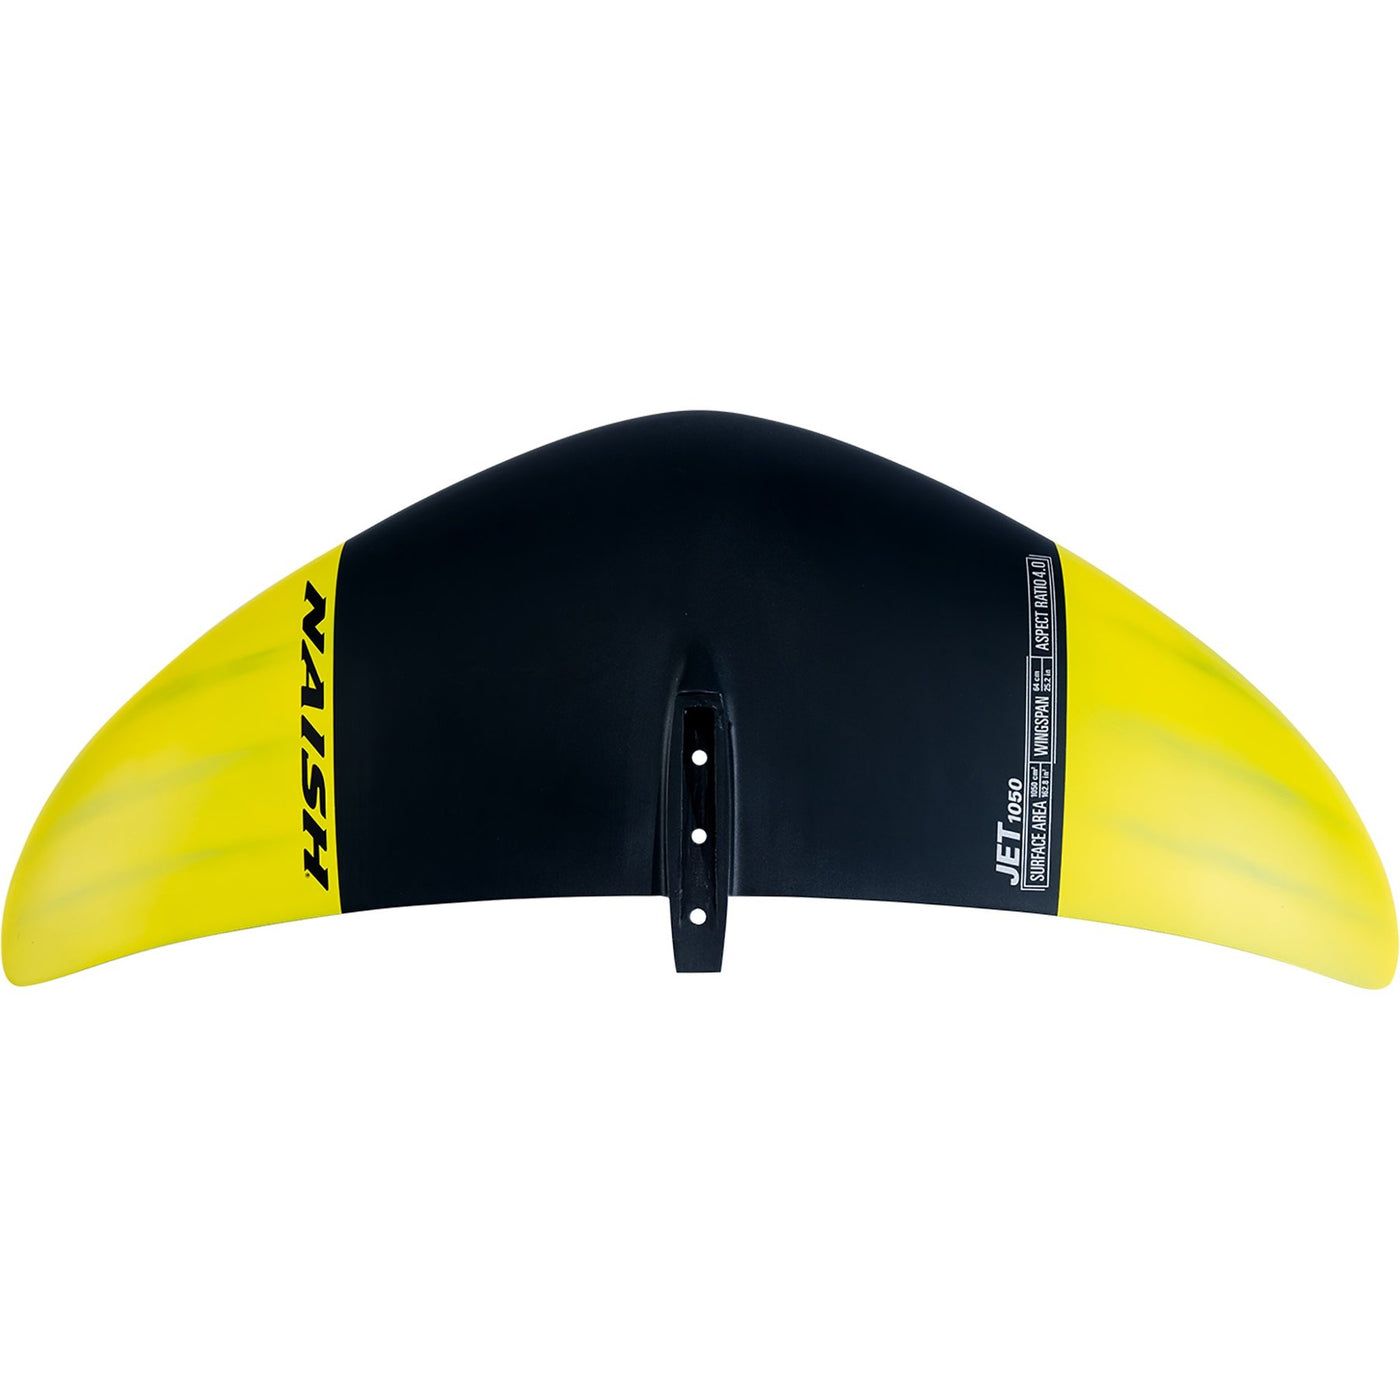 Naish 2020 Jet hydrofoil Front Wing 1050 - Alleydesigns  Pty Ltd                                             ABN: 44165571264